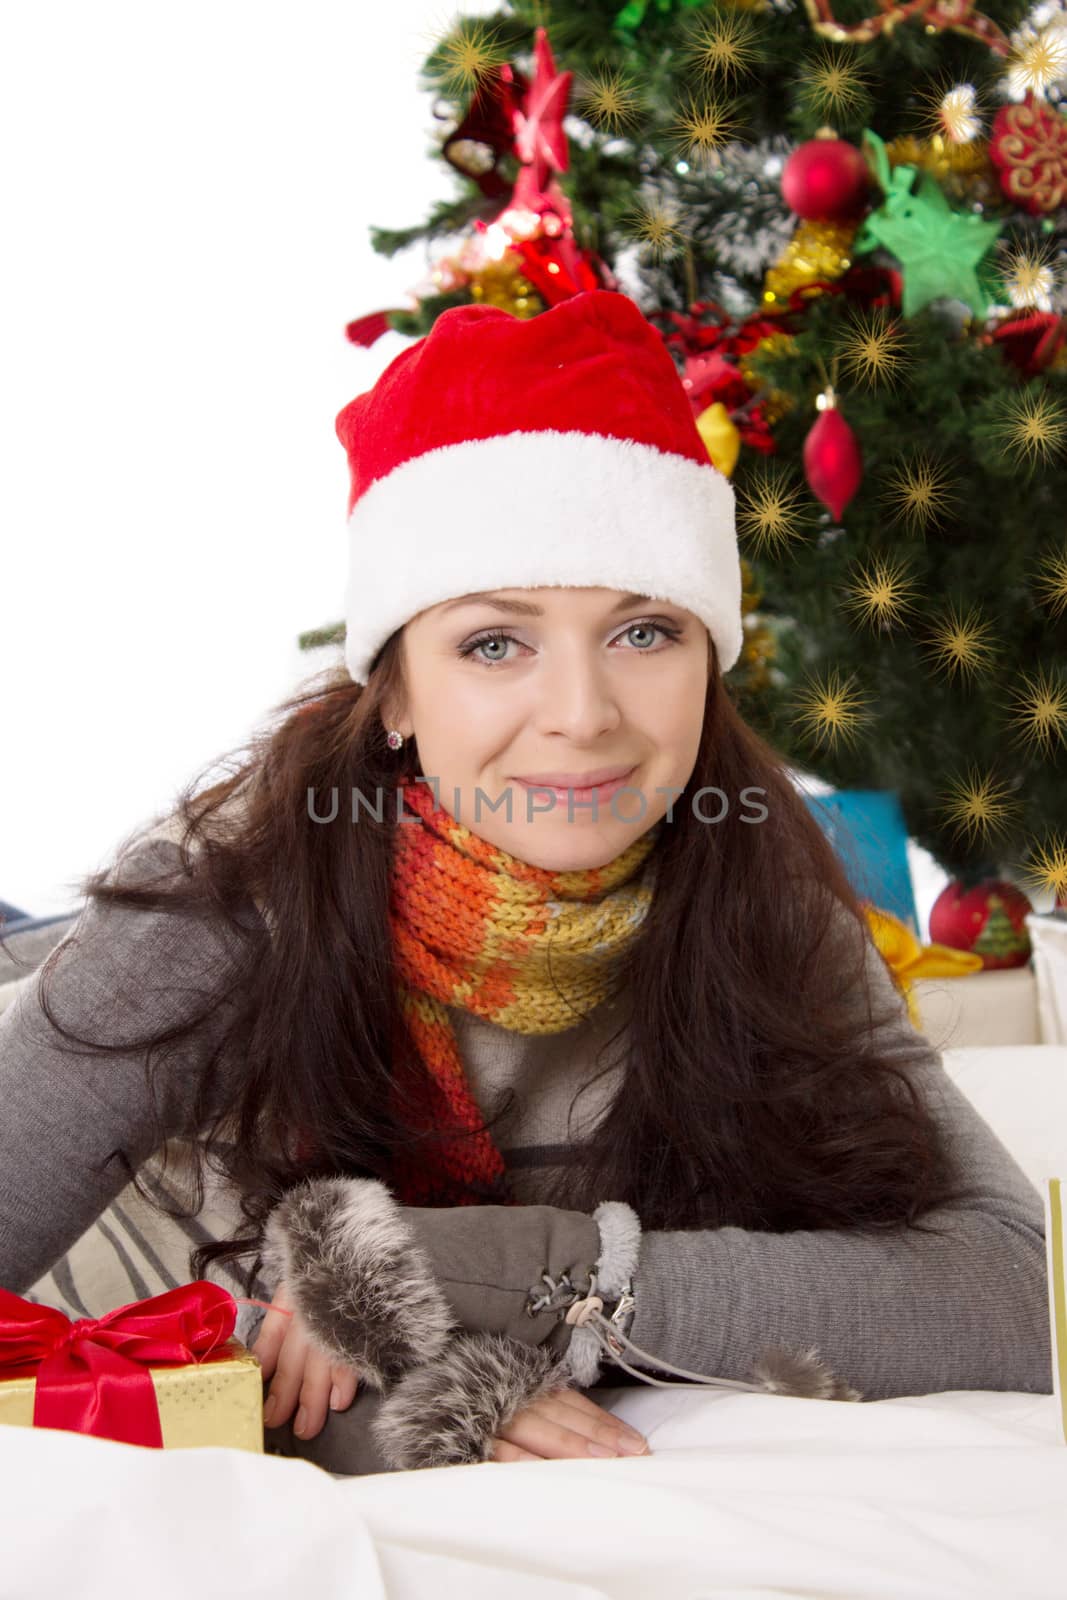 Smiling woman in Santa hat and fur mittens lying under Christmas tree